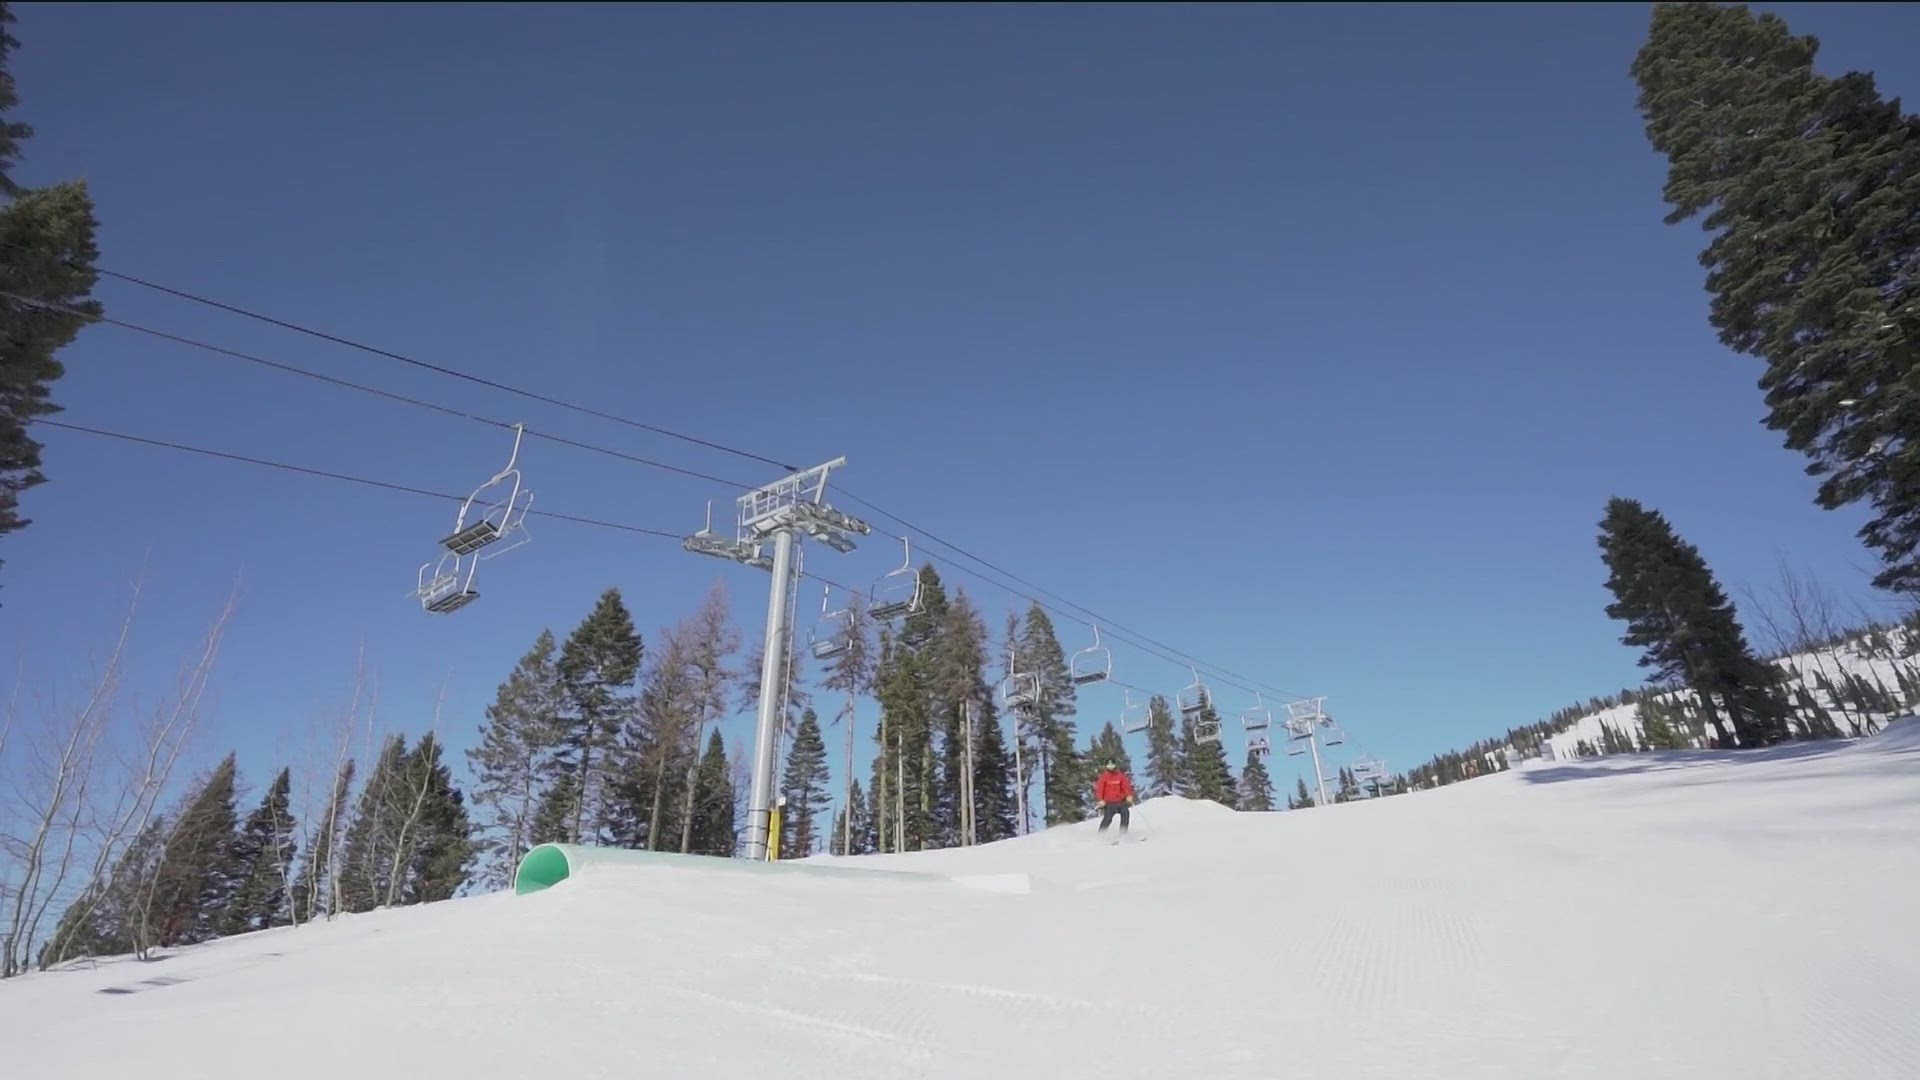 On April 20 and 21, Brundage will open the lifts for you to get a few more turns in, and send out the season.